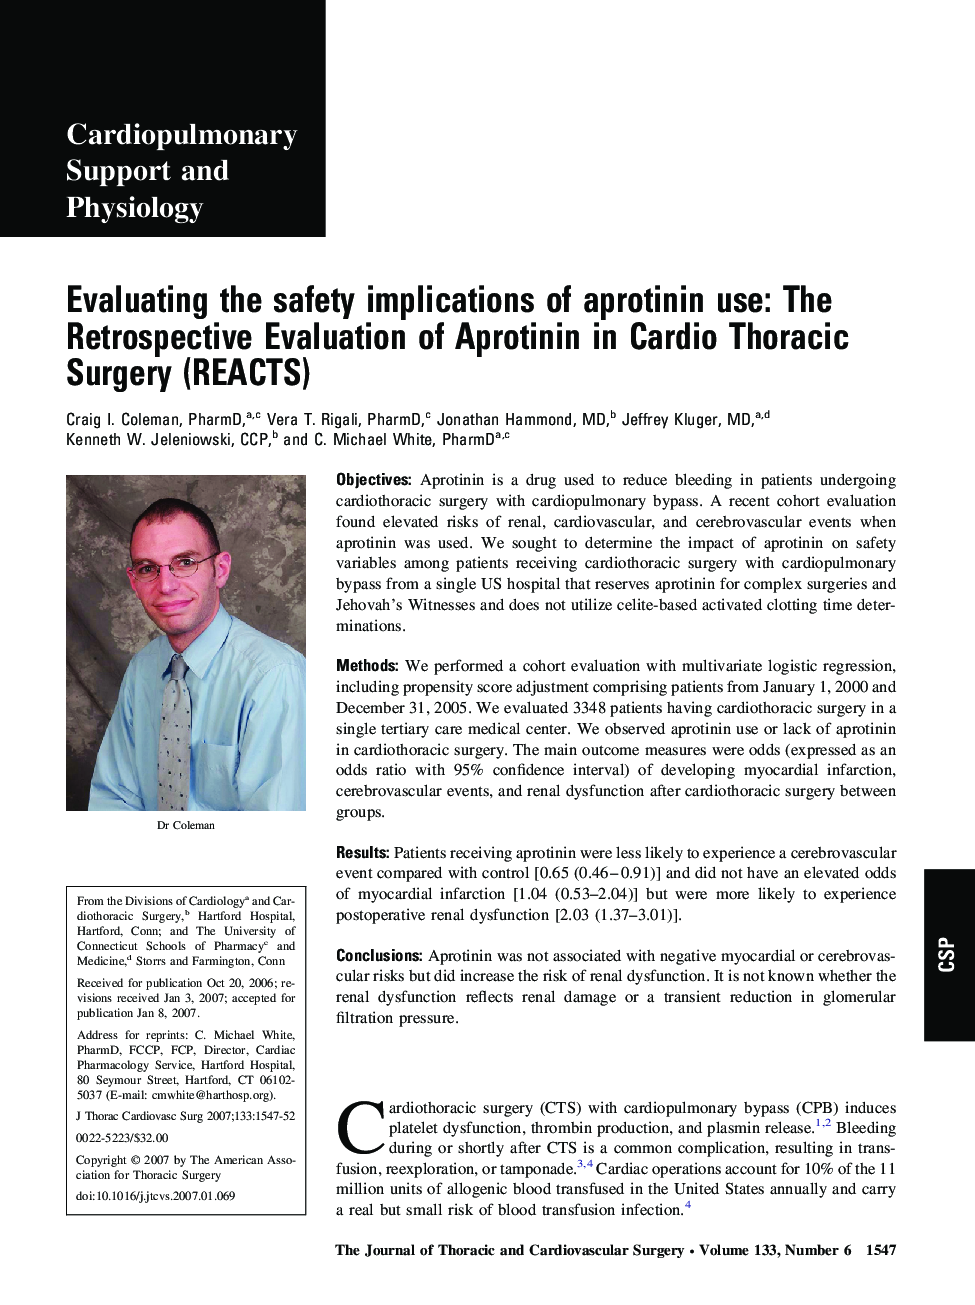 Evaluating the safety implications of aprotinin use: The Retrospective Evaluation of Aprotinin in Cardio Thoracic Surgery (REACTS)